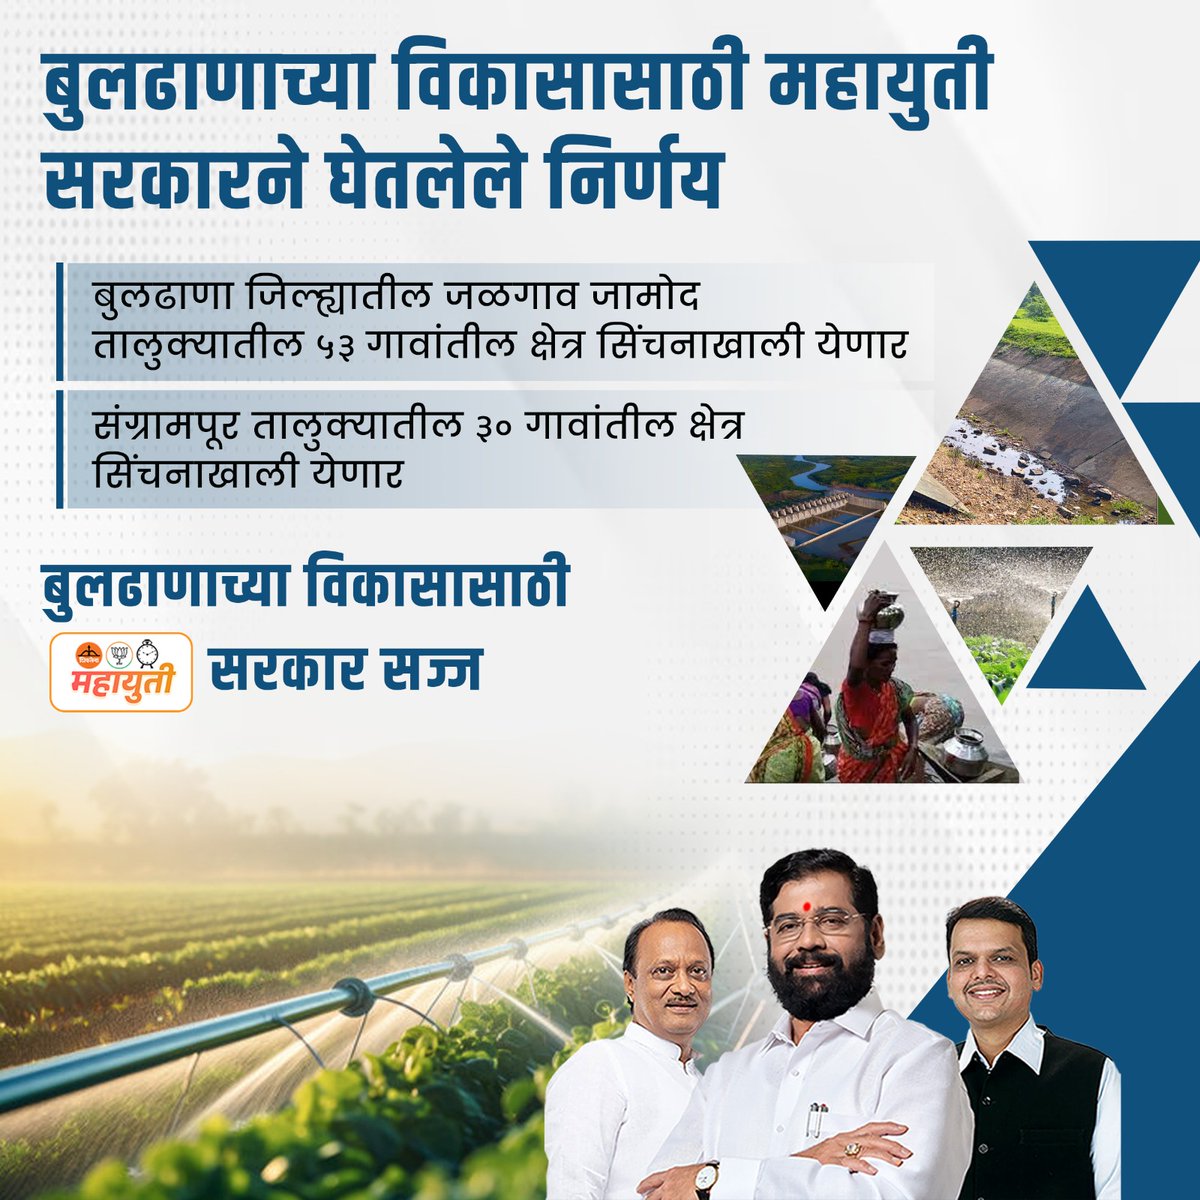 Hats off to CM Eknath Shinde govt for their proactive steps towards transforming Buldhana's agricultural landscape. With the expansion of irrigation to 53 villages in Jalgaon Jamod and 30 villages in Sangrampur talukas, the future looks promising for the district's farmers.